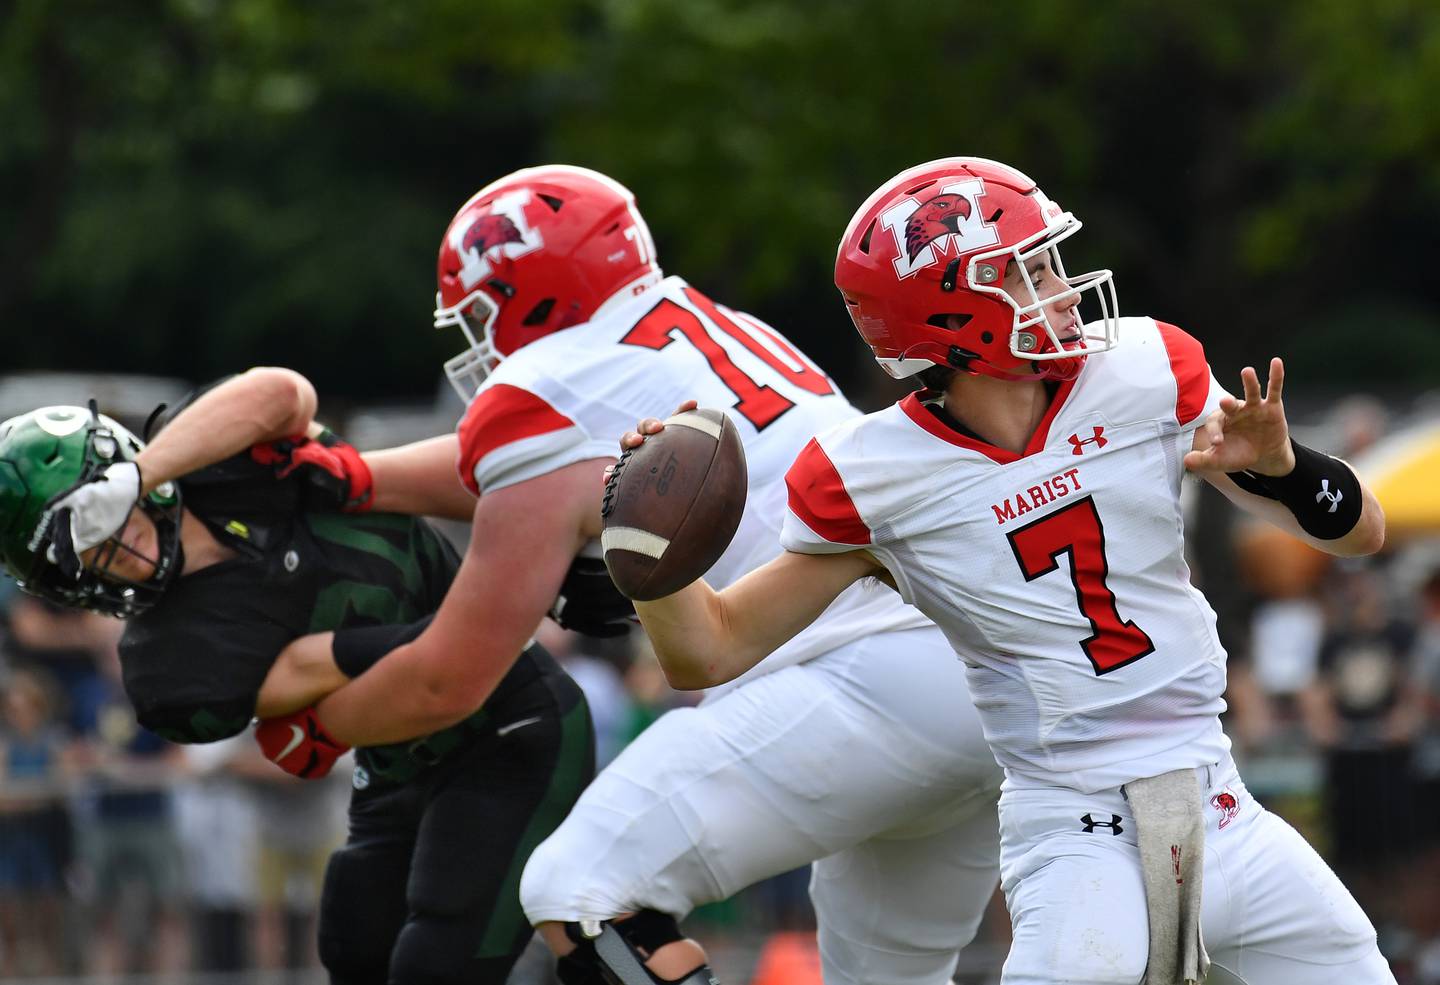 Marist quarterback Owen Winters (7) launches a pass behind a block from teammate Rico Schrieber (70) during a game on Aug. 26, 2023 at Glenbard West High School in Glen Ellyn.